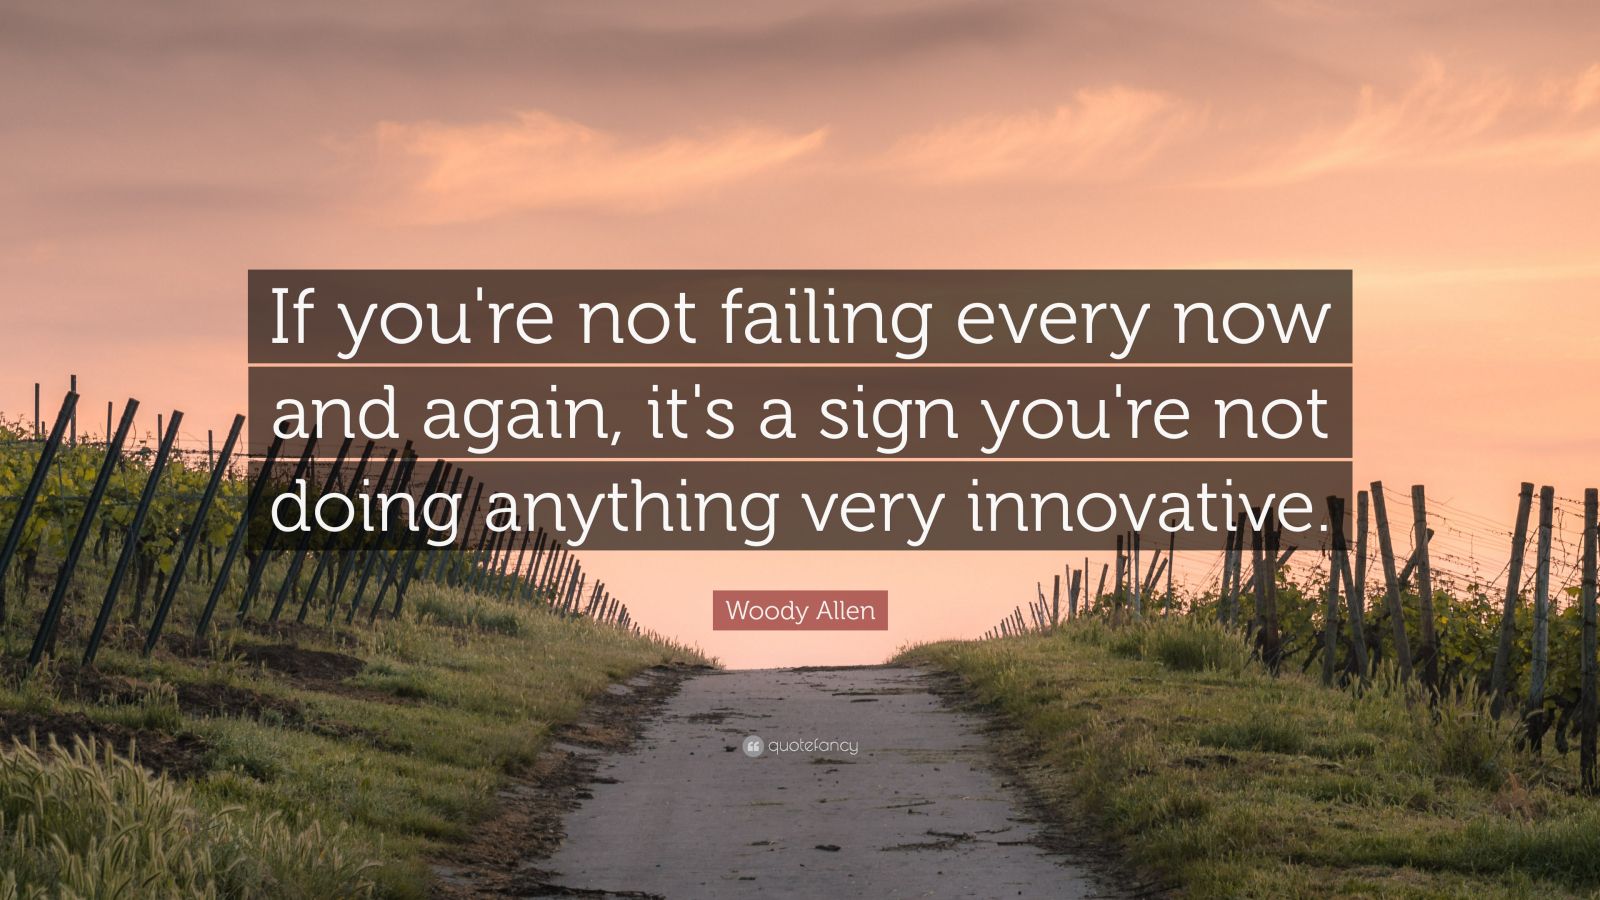 Woody Allen Quote: “If you're not failing every now and again, it's a ...